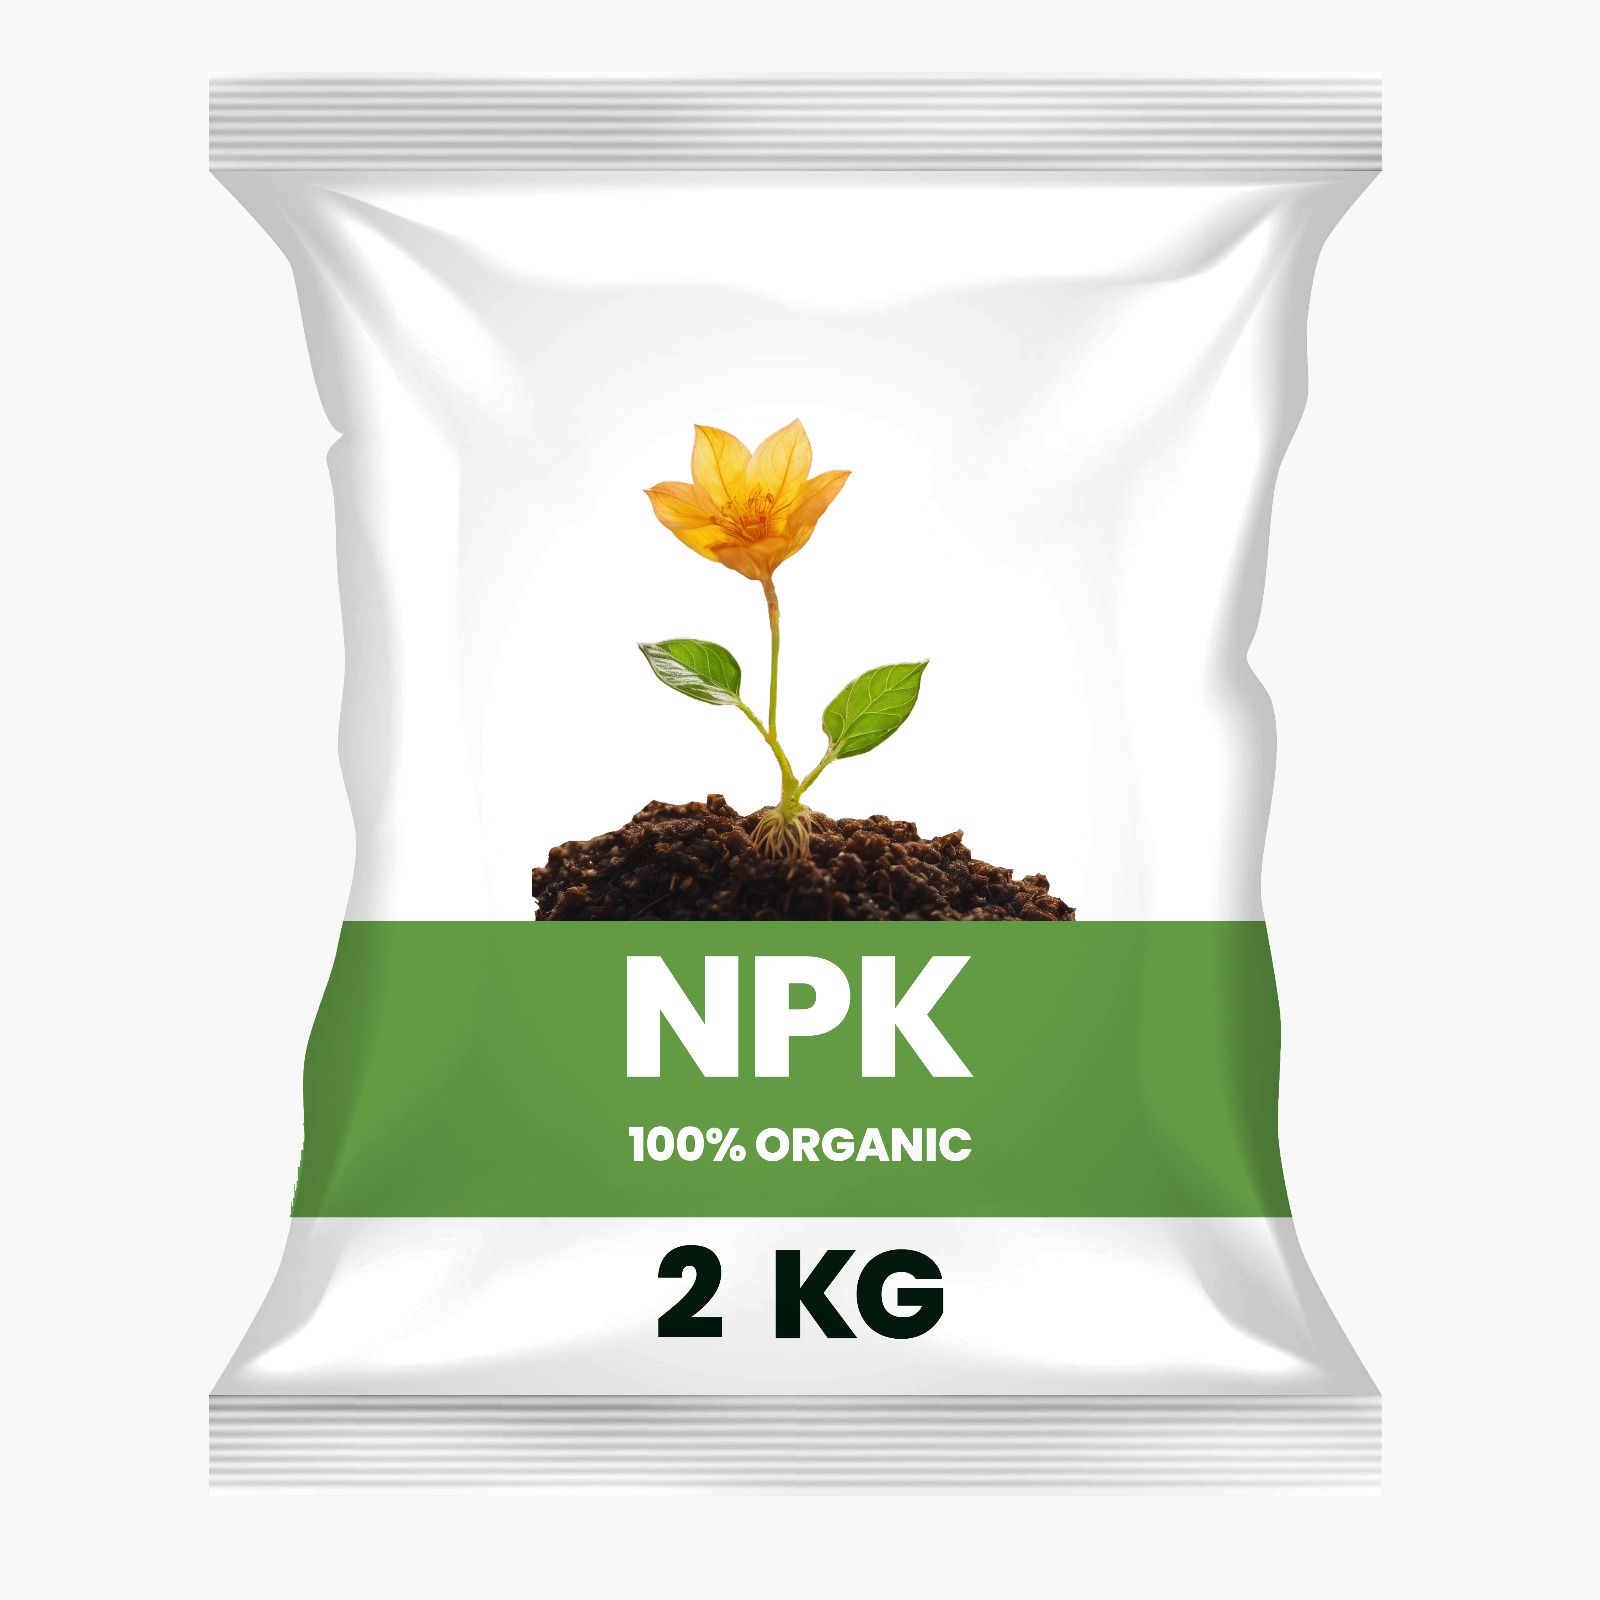  NPK Fertilizer for Plants (2kg) I Complete Plant Food for Gardening, Growth Boost and Flowering